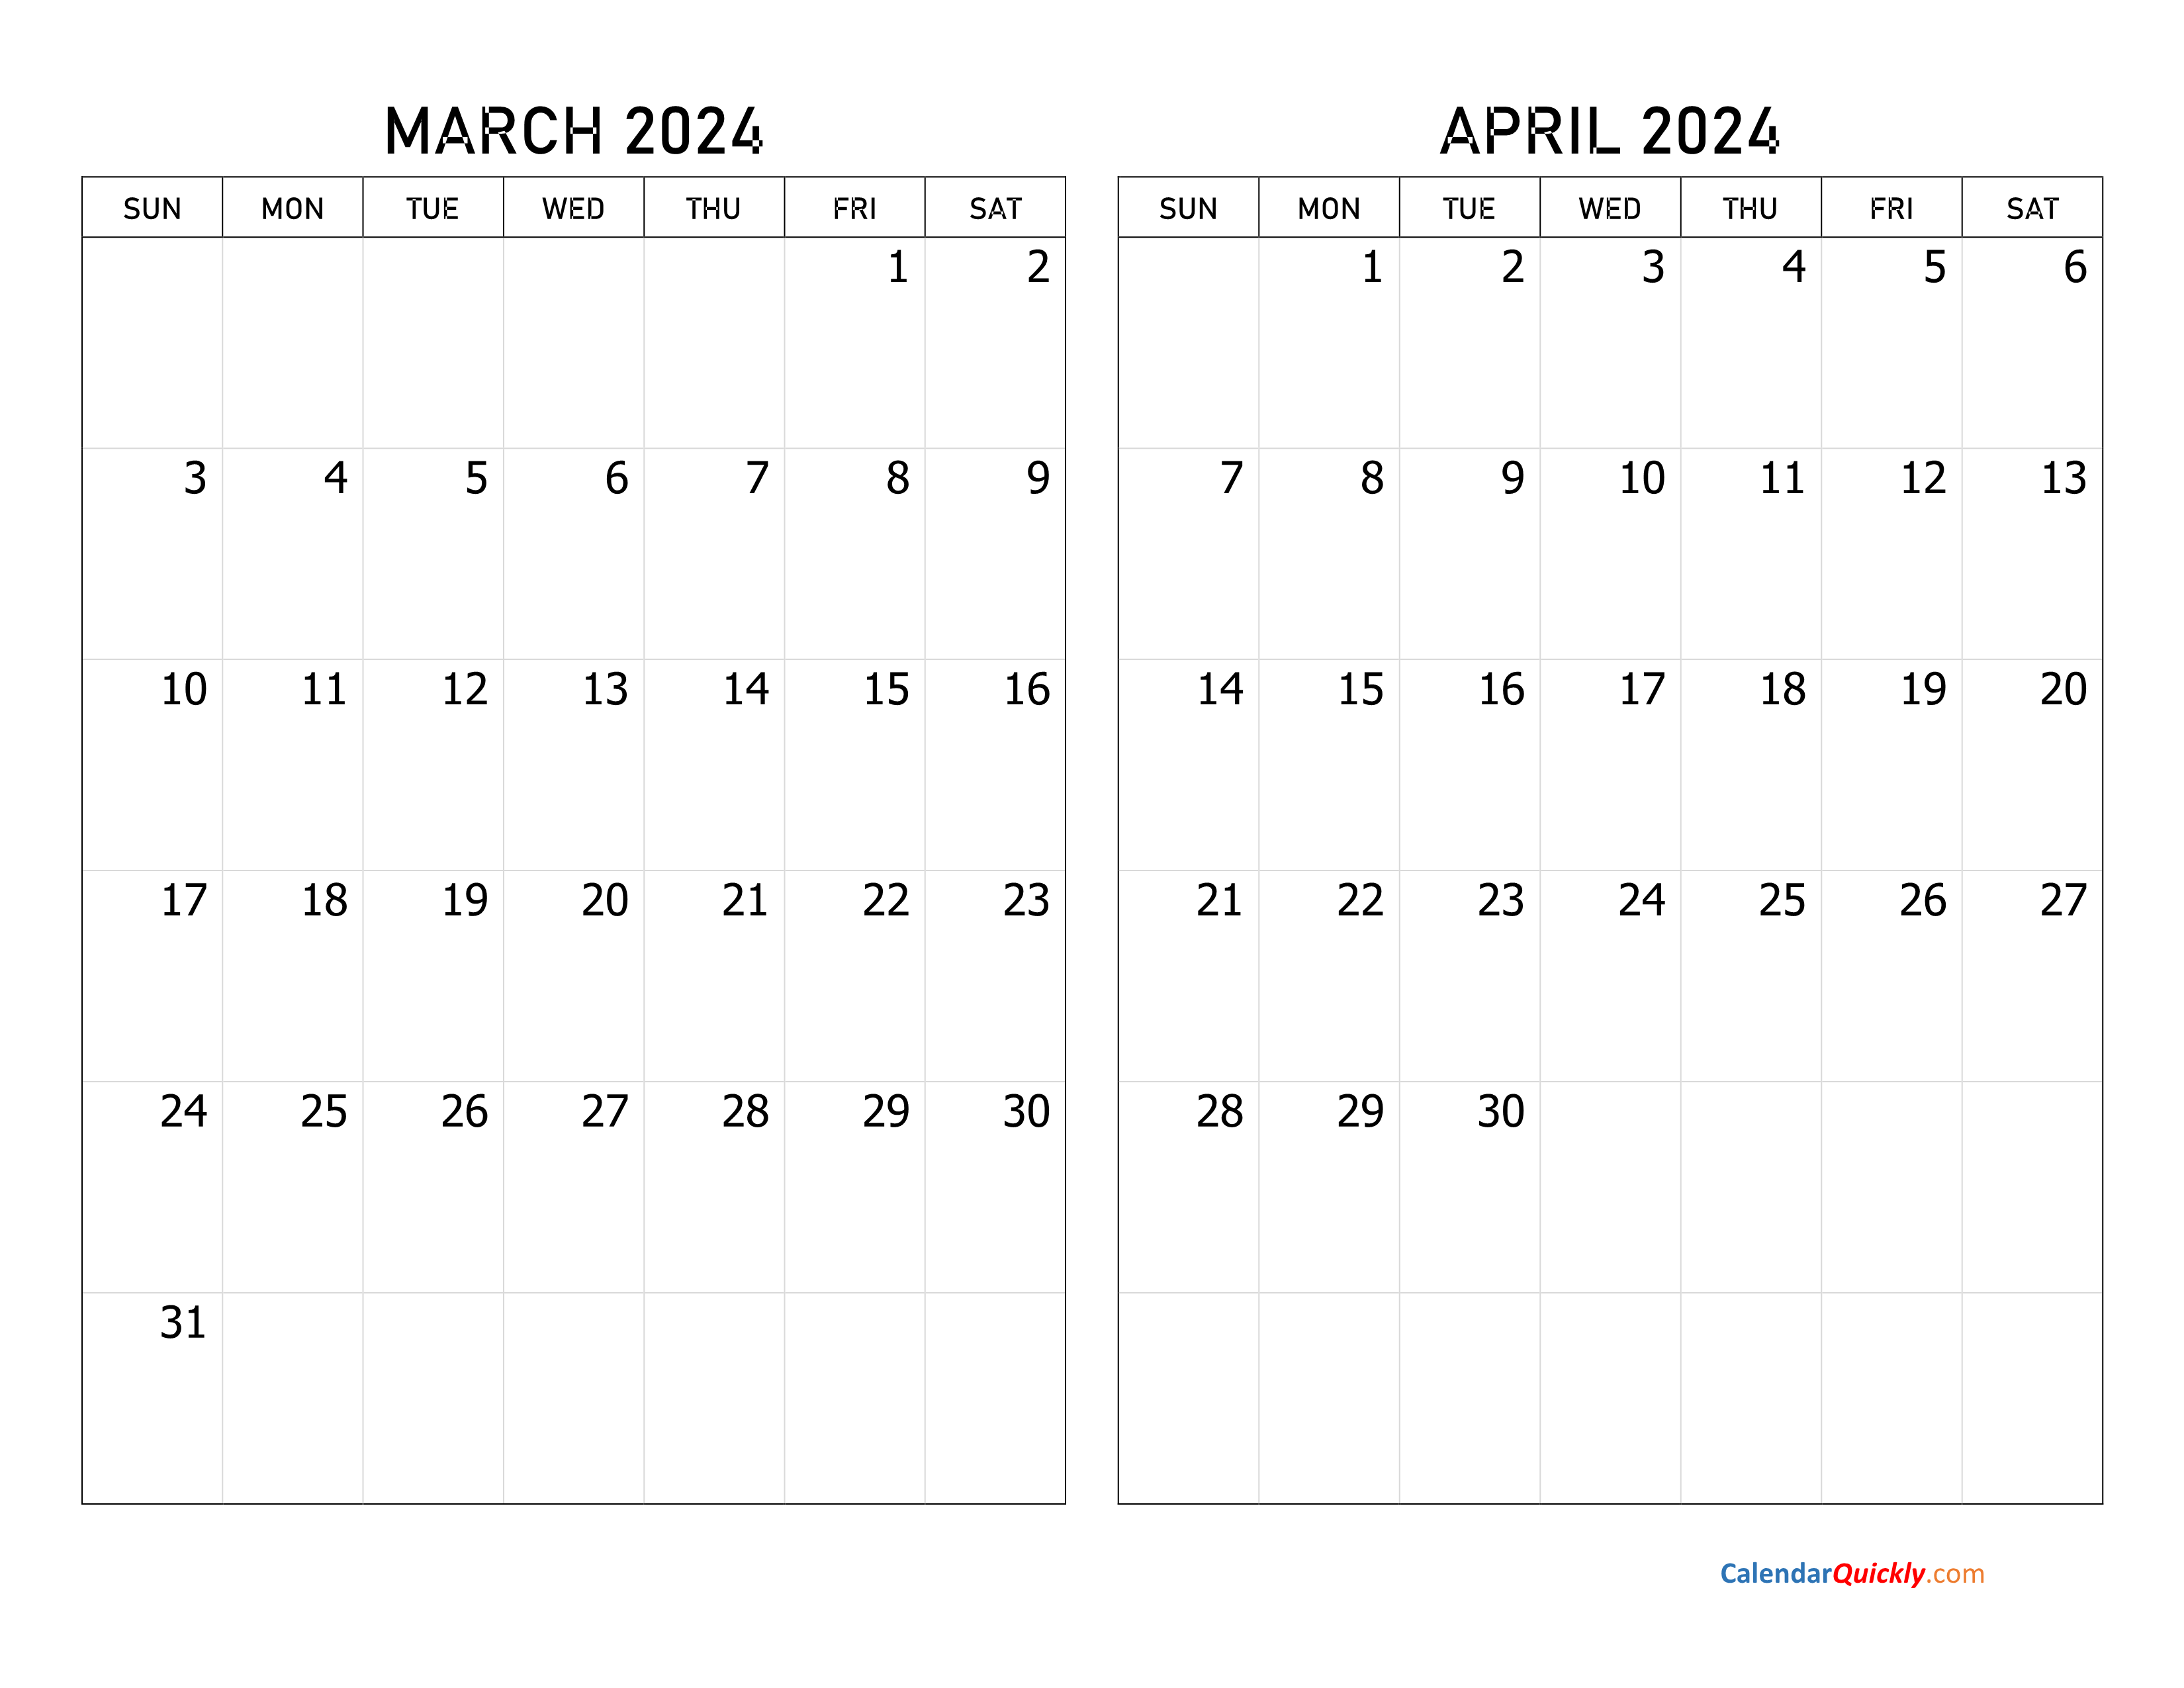 March And April 2024 Calendar | Calendar Quickly with regard to March And April Calendar 2024